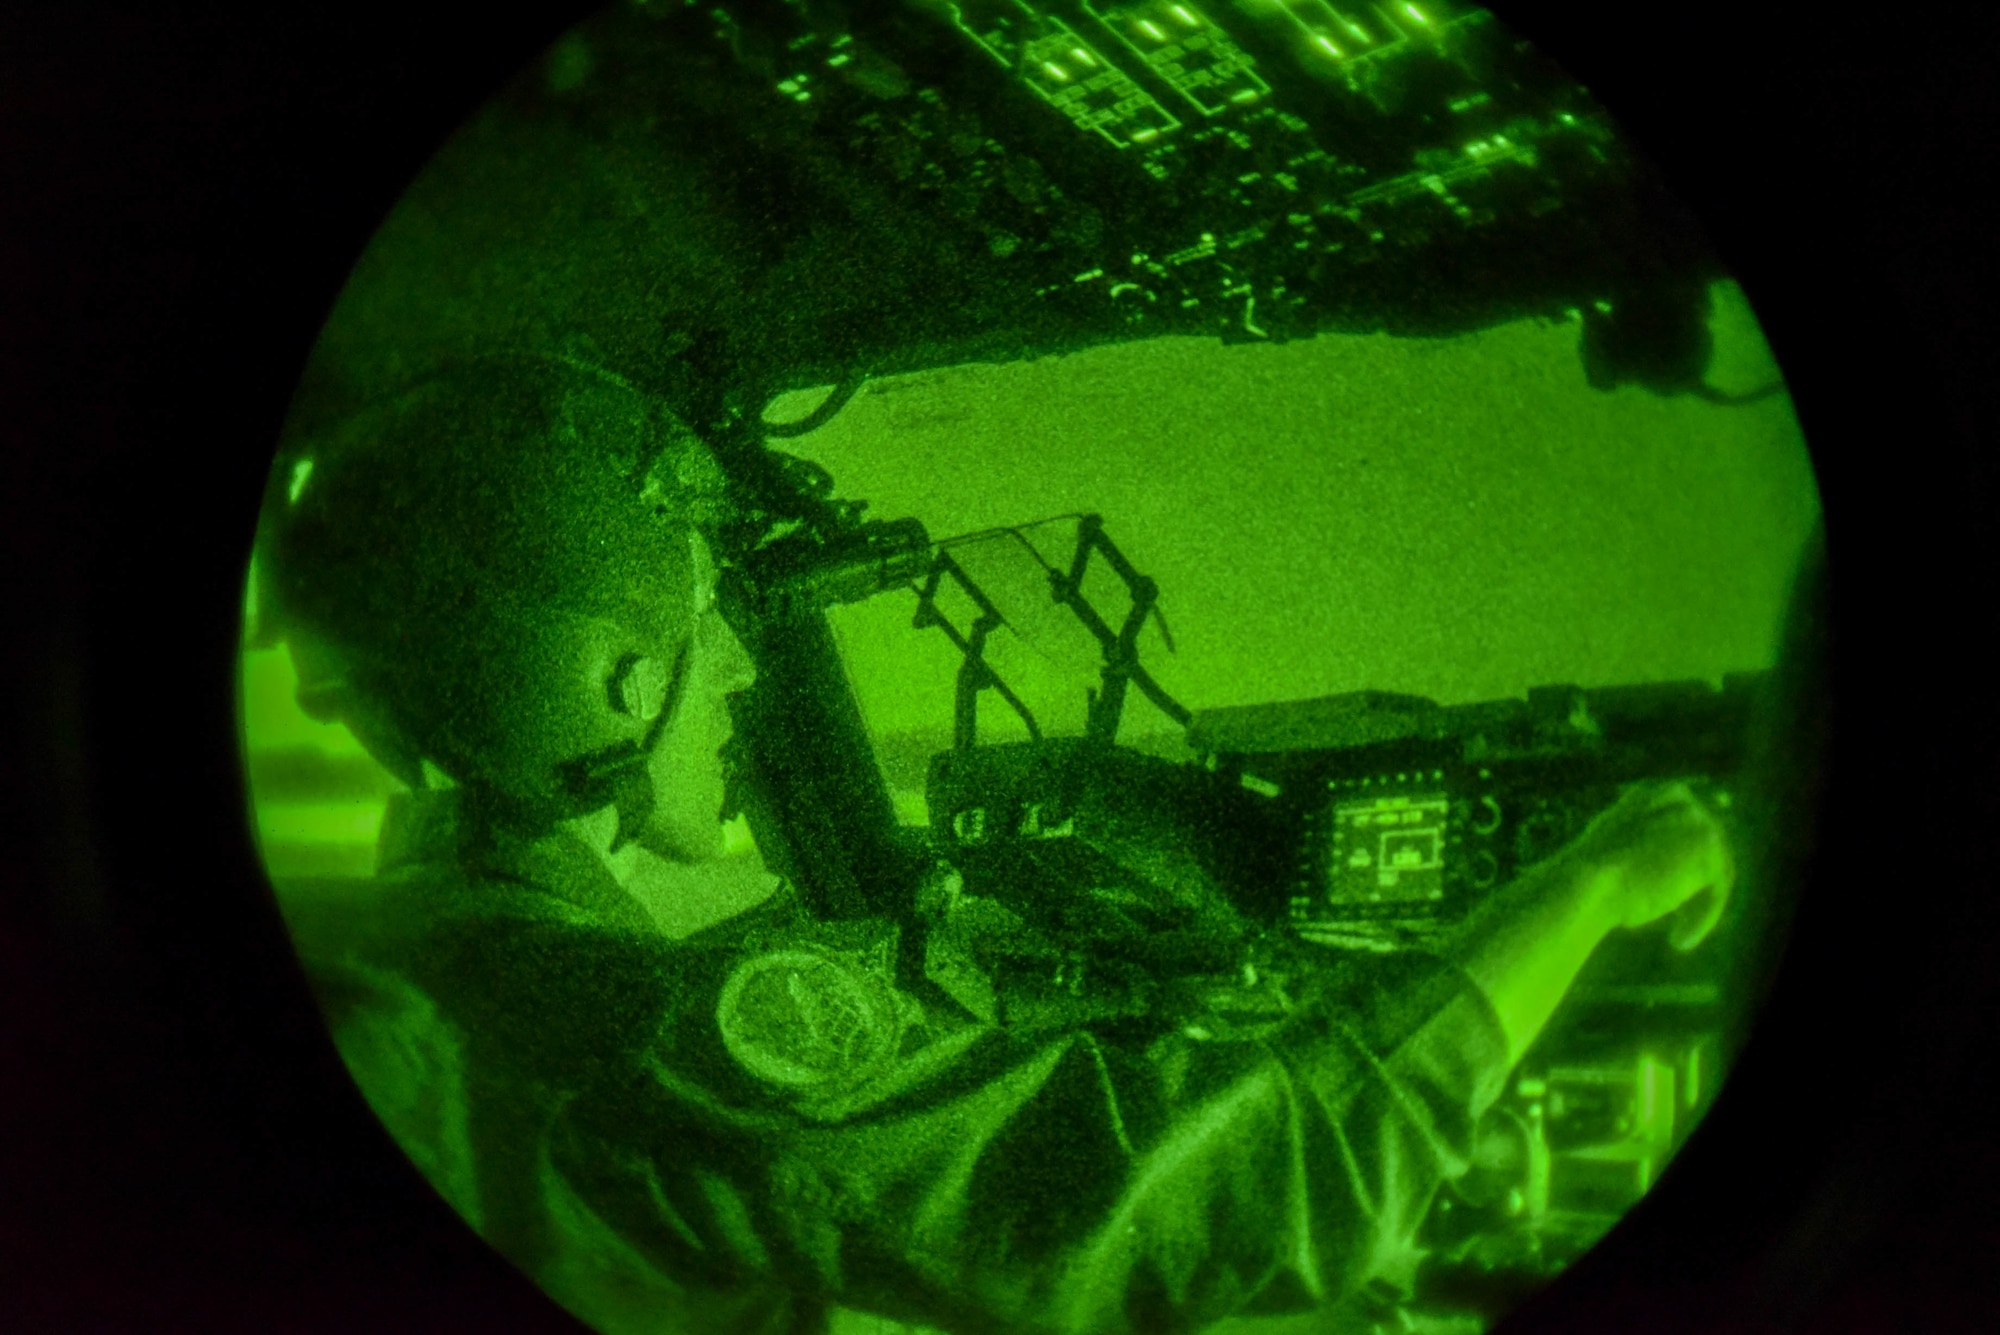 U.S. Air Force Capt. Christopher Abrahamsen, 535th Airlift Squadron instructor pilot, flies a C-17 Globemaster III during the night with the assistance of night vision goggles during Exercise Global Dexterity at Joint Base Pearl Harbor-Hickam, Hawaii, May 5, 2022. The 15th Wing invited the Royal Australian Air Force No. 36 Squadron to join in a bilateral C-17 focused exercise to better increase interoperability for future Indo-Pacific operations. (U.S. Air Force photo by Airman 1st Class Makensie Cooper)